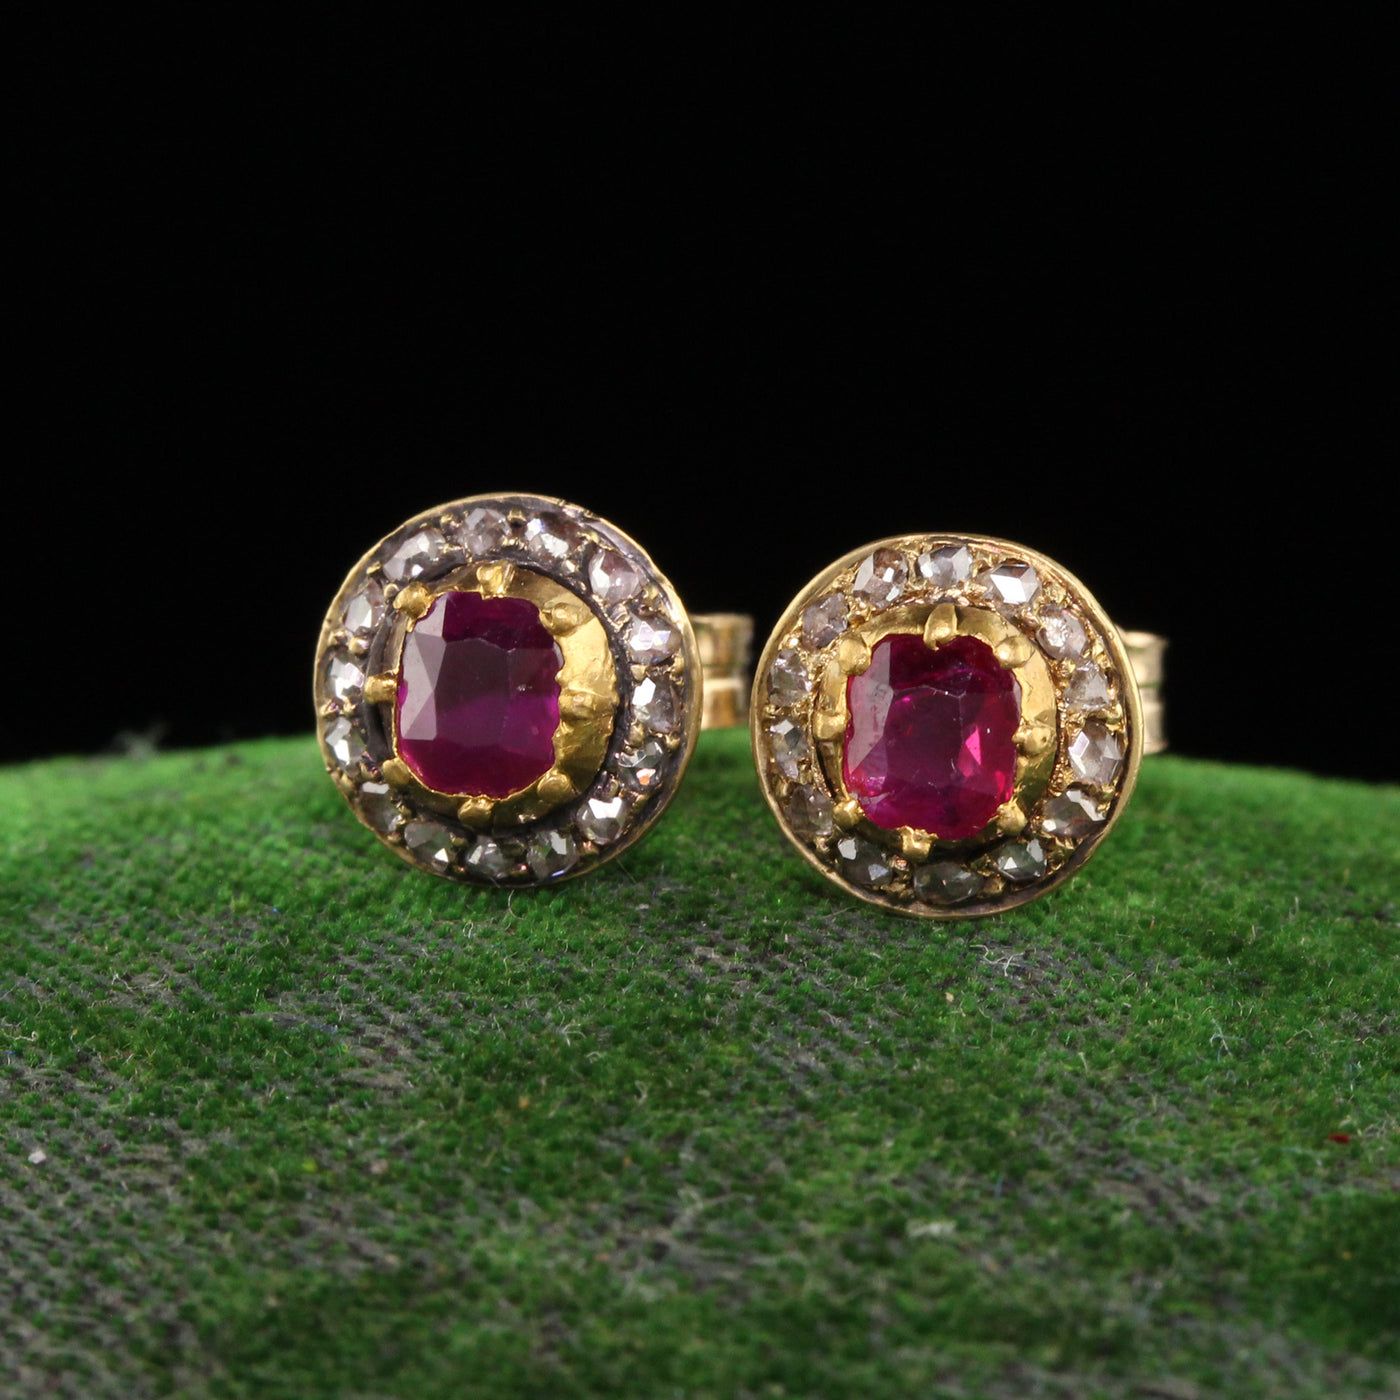 Antique Victorian 18K Yellow Gold Burma Ruby and Diamond Stud Earrings